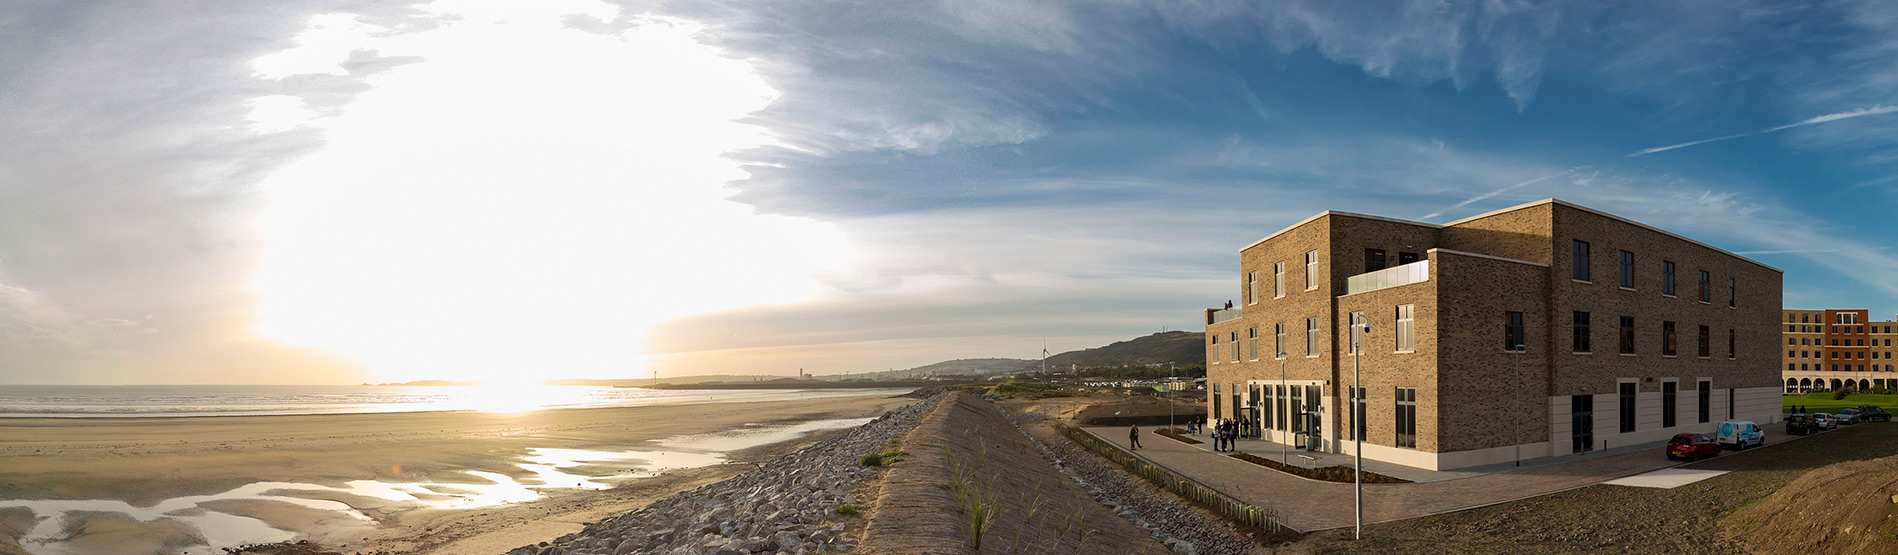 The College building on the edge of he Swansea University Bay Campus overlooking the beach.